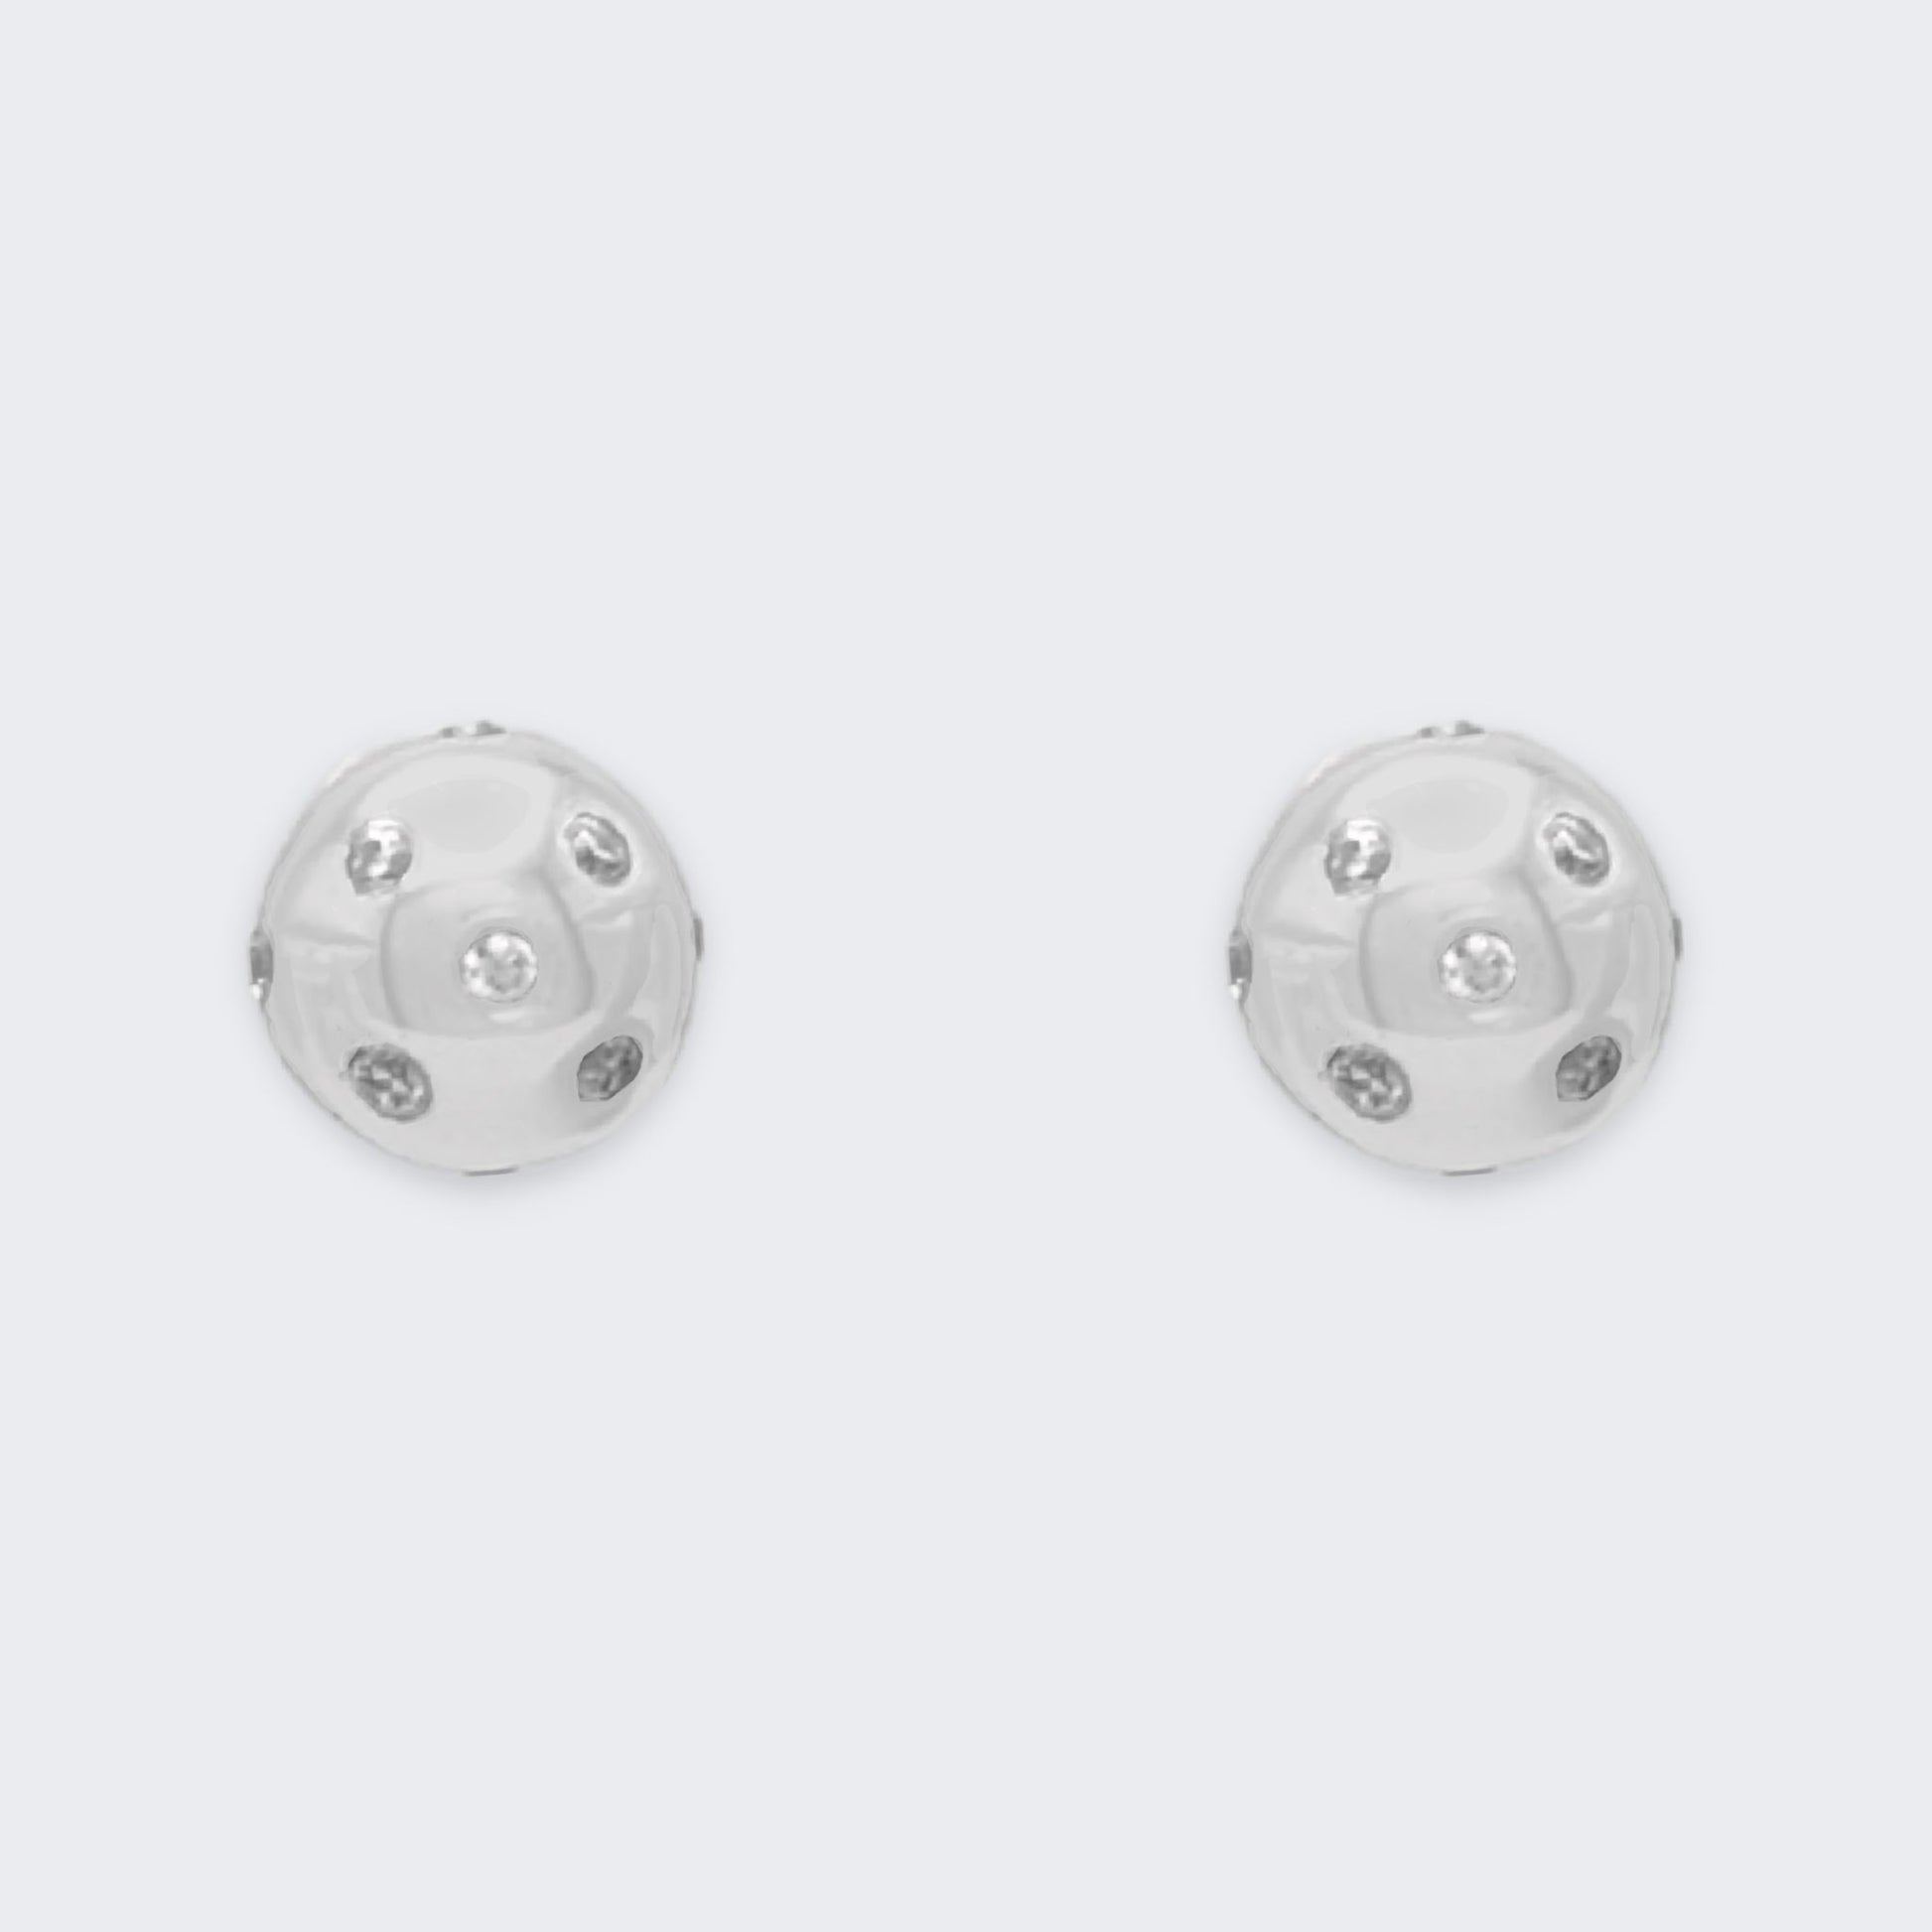 fran ball stud earrings in sterling silver pair (front view)